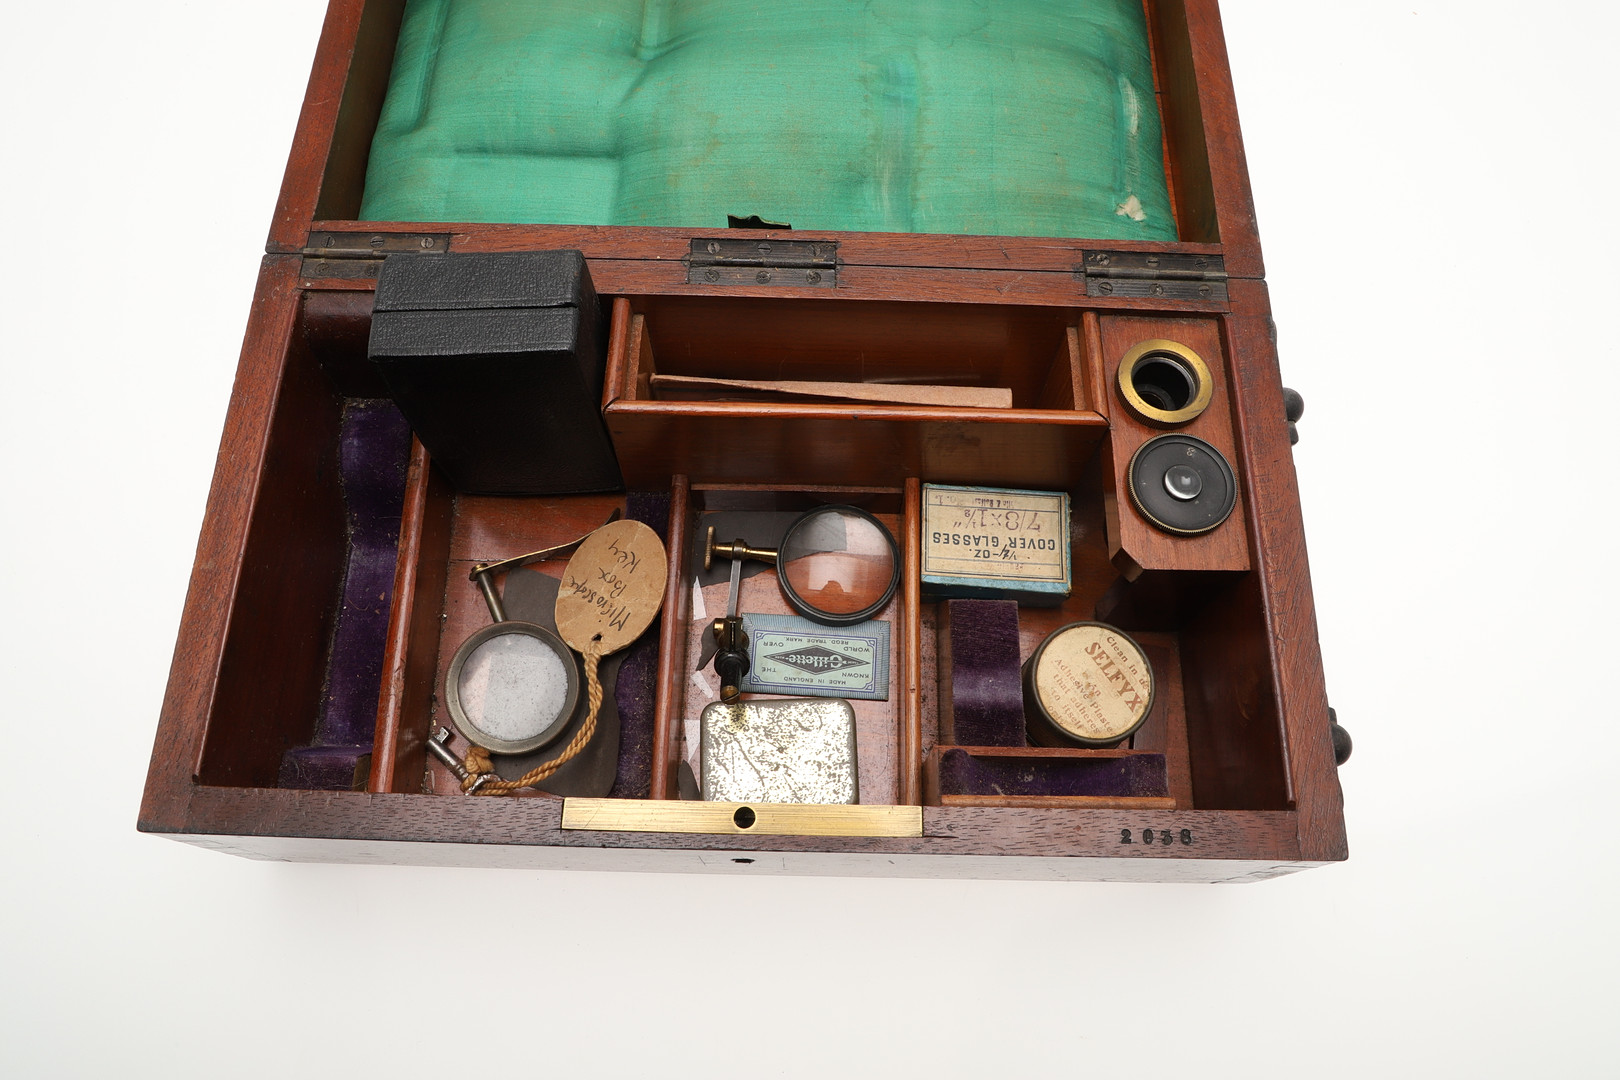 CONSTANT VERICK. A FRENCH LATE 19TH CENTURY CASED MICROSCOPE. - Image 9 of 18